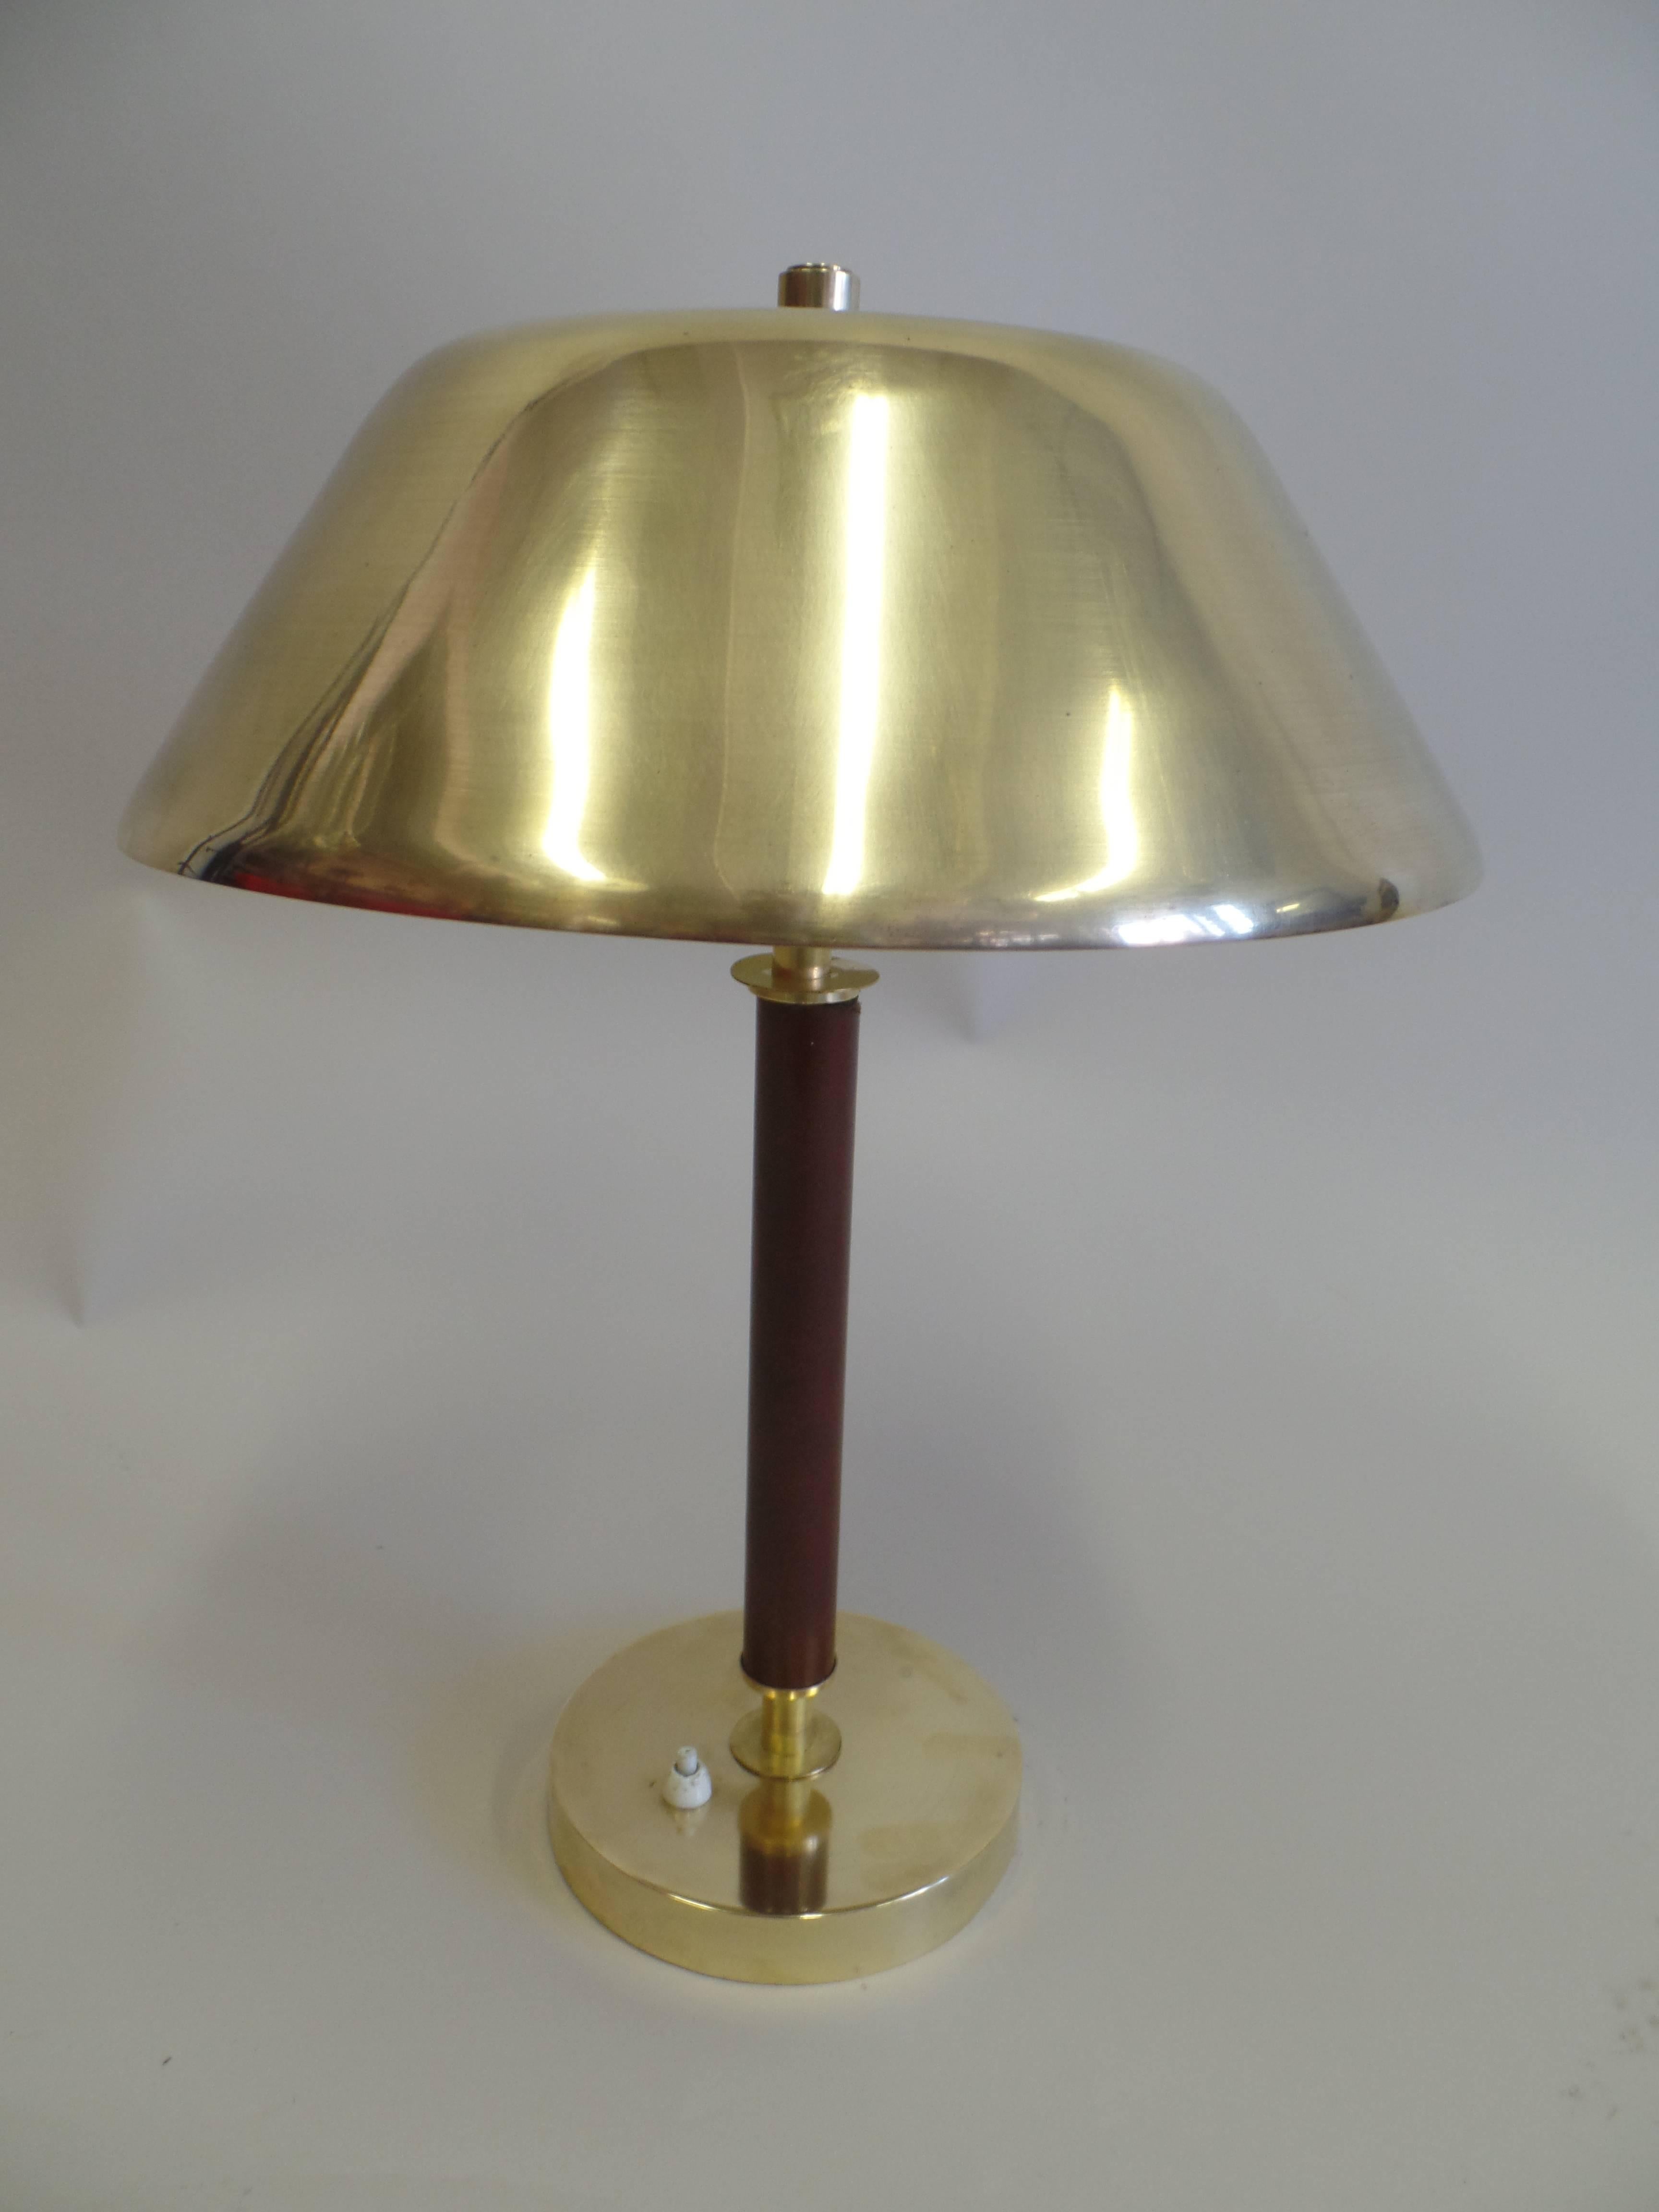 Elegant modern brass and leather desk or table lamp attributed to Jacques Adnet with a dark brown leather stem, solid brass base and shade.